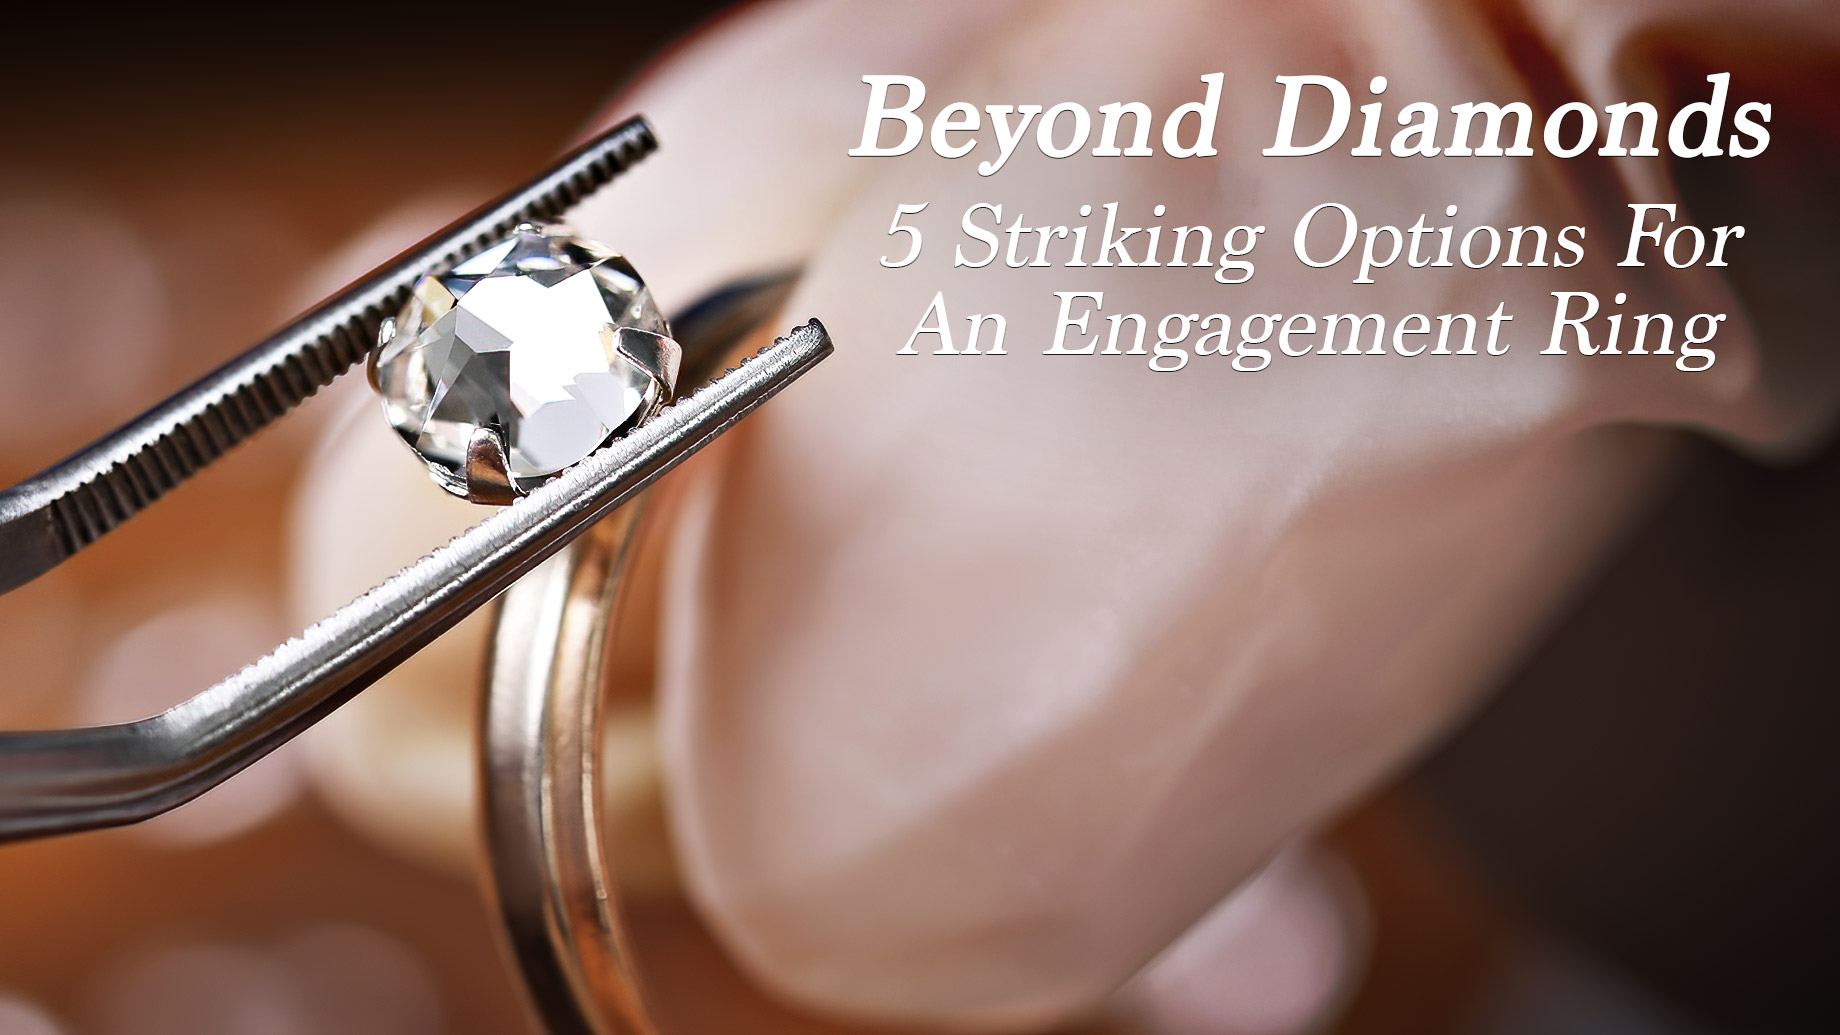 Beyond Diamonds – 5 Striking Options For An Engagement Ring